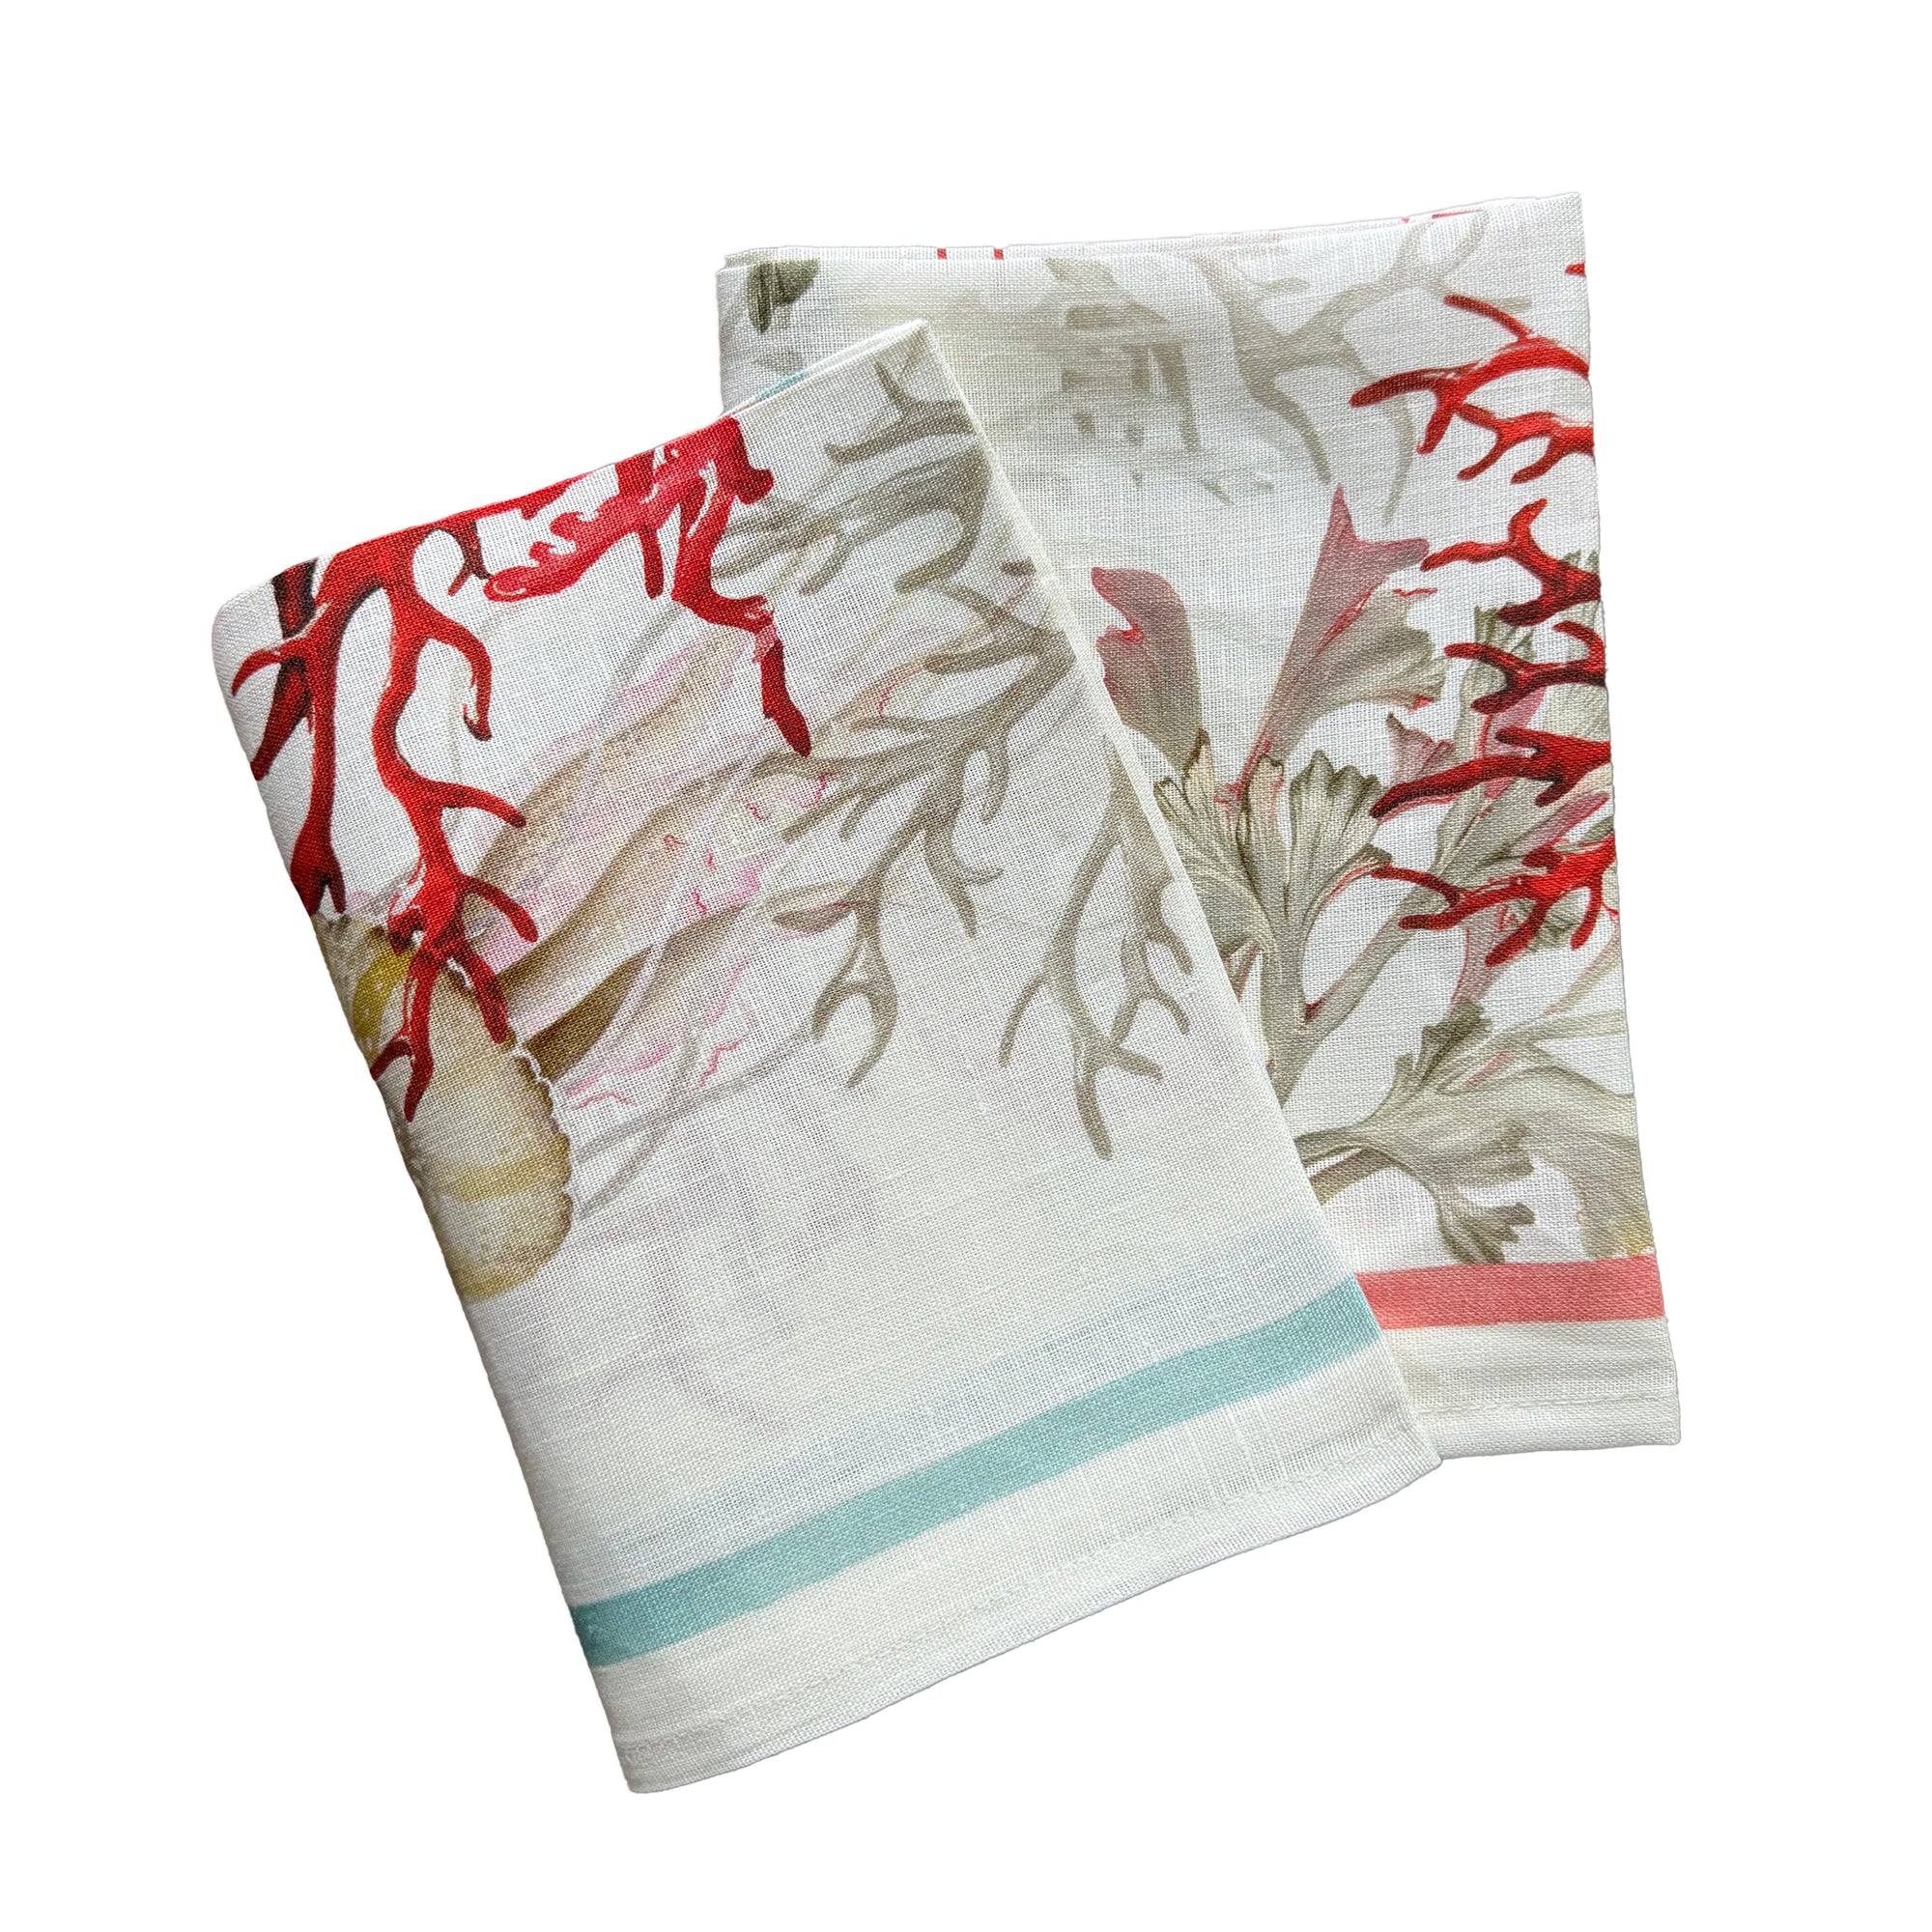 TTT Coral Linen Kitchen Towels, Set of 2, crafted from sustainably sourced materials at an Italian mill, feature a coral and seaweed pattern in shades of red, beige, and green with small green and red stripes on the edges.